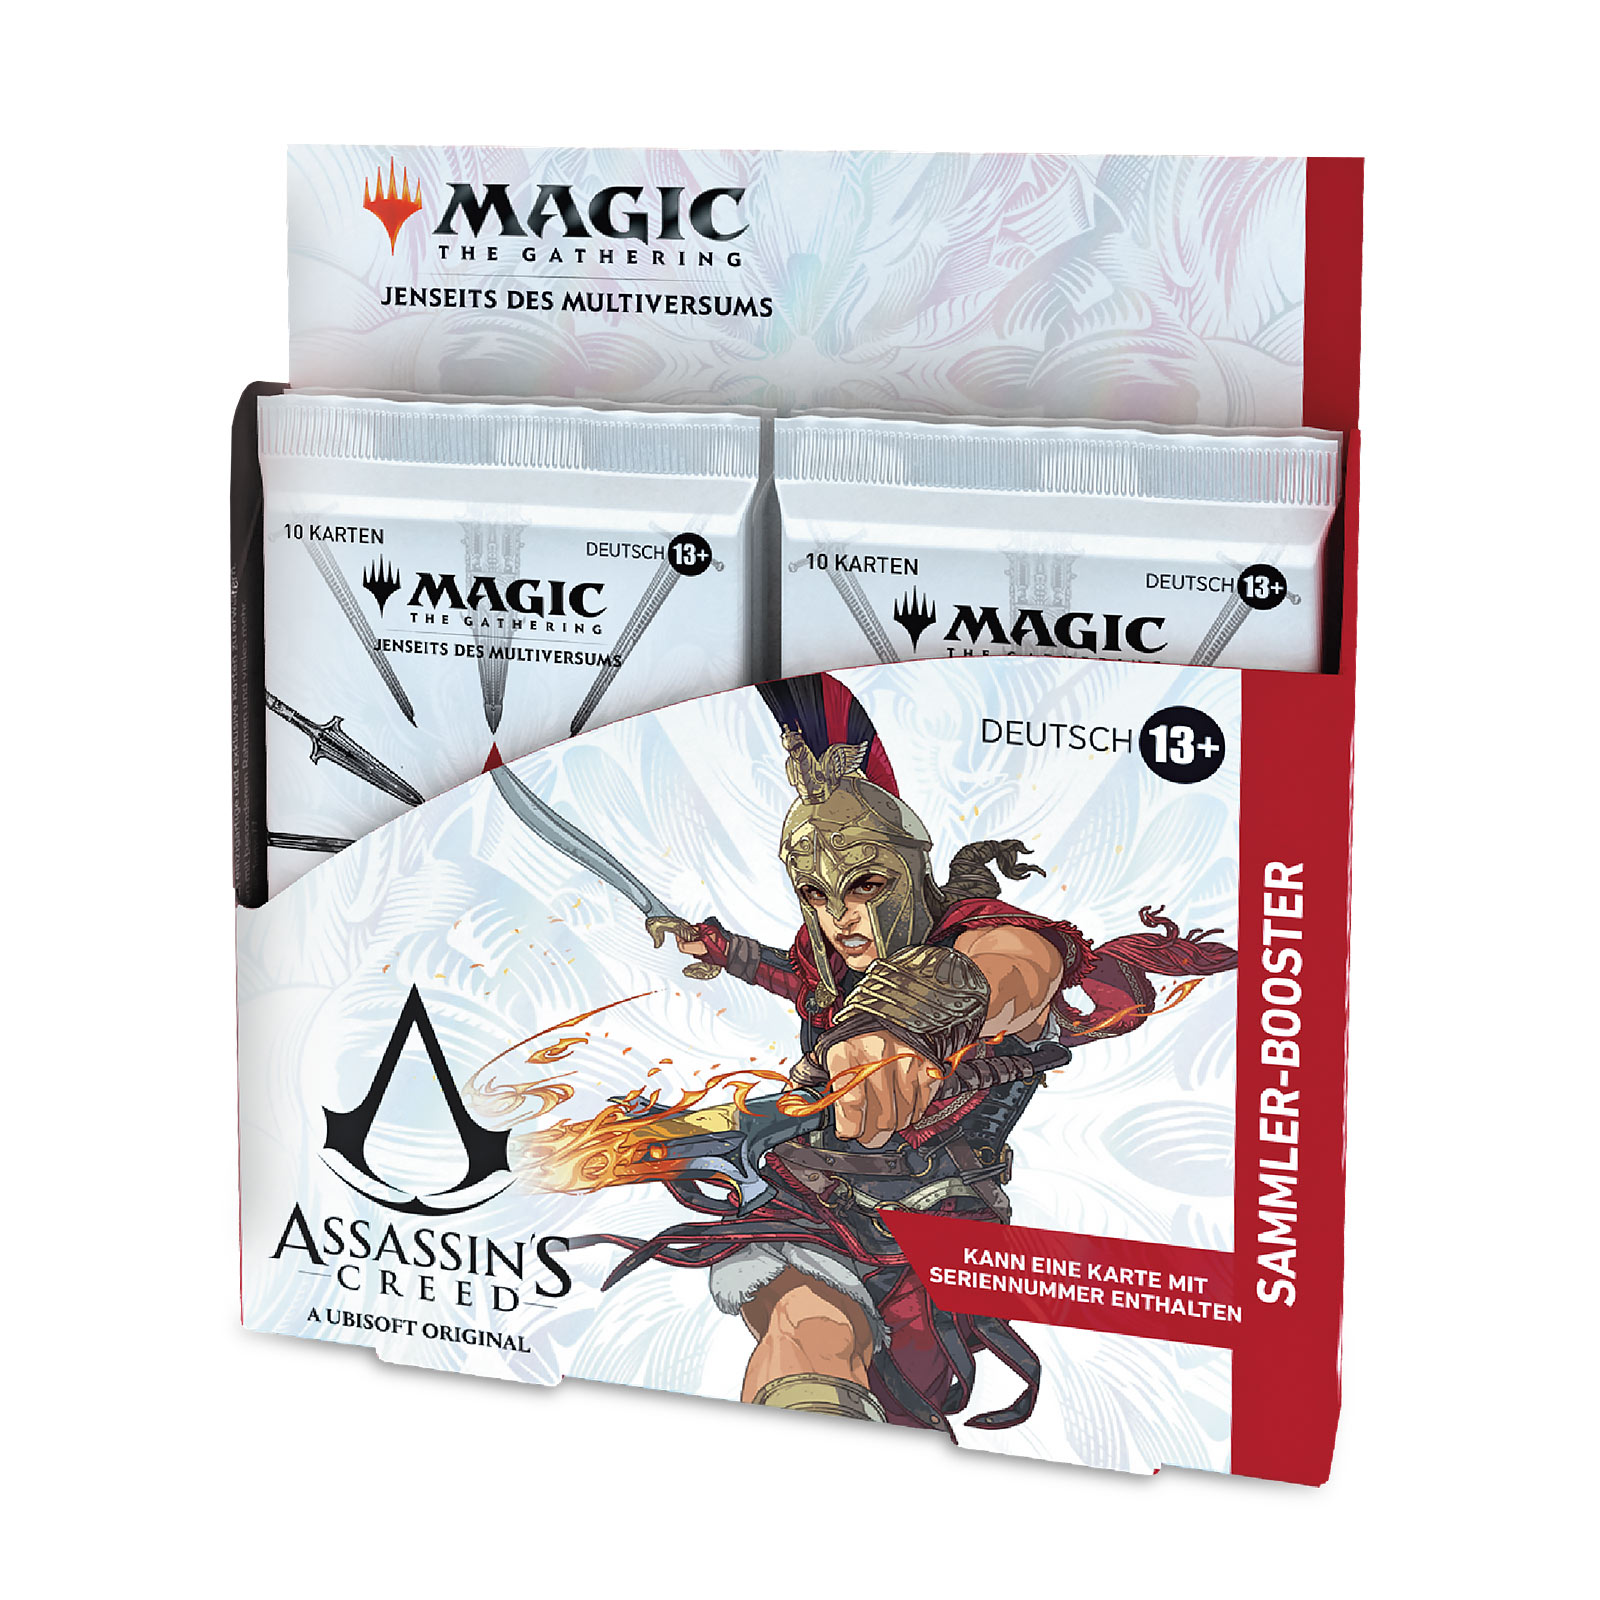 Assassin's Creed Collector Booster Display - Magic The Gathering